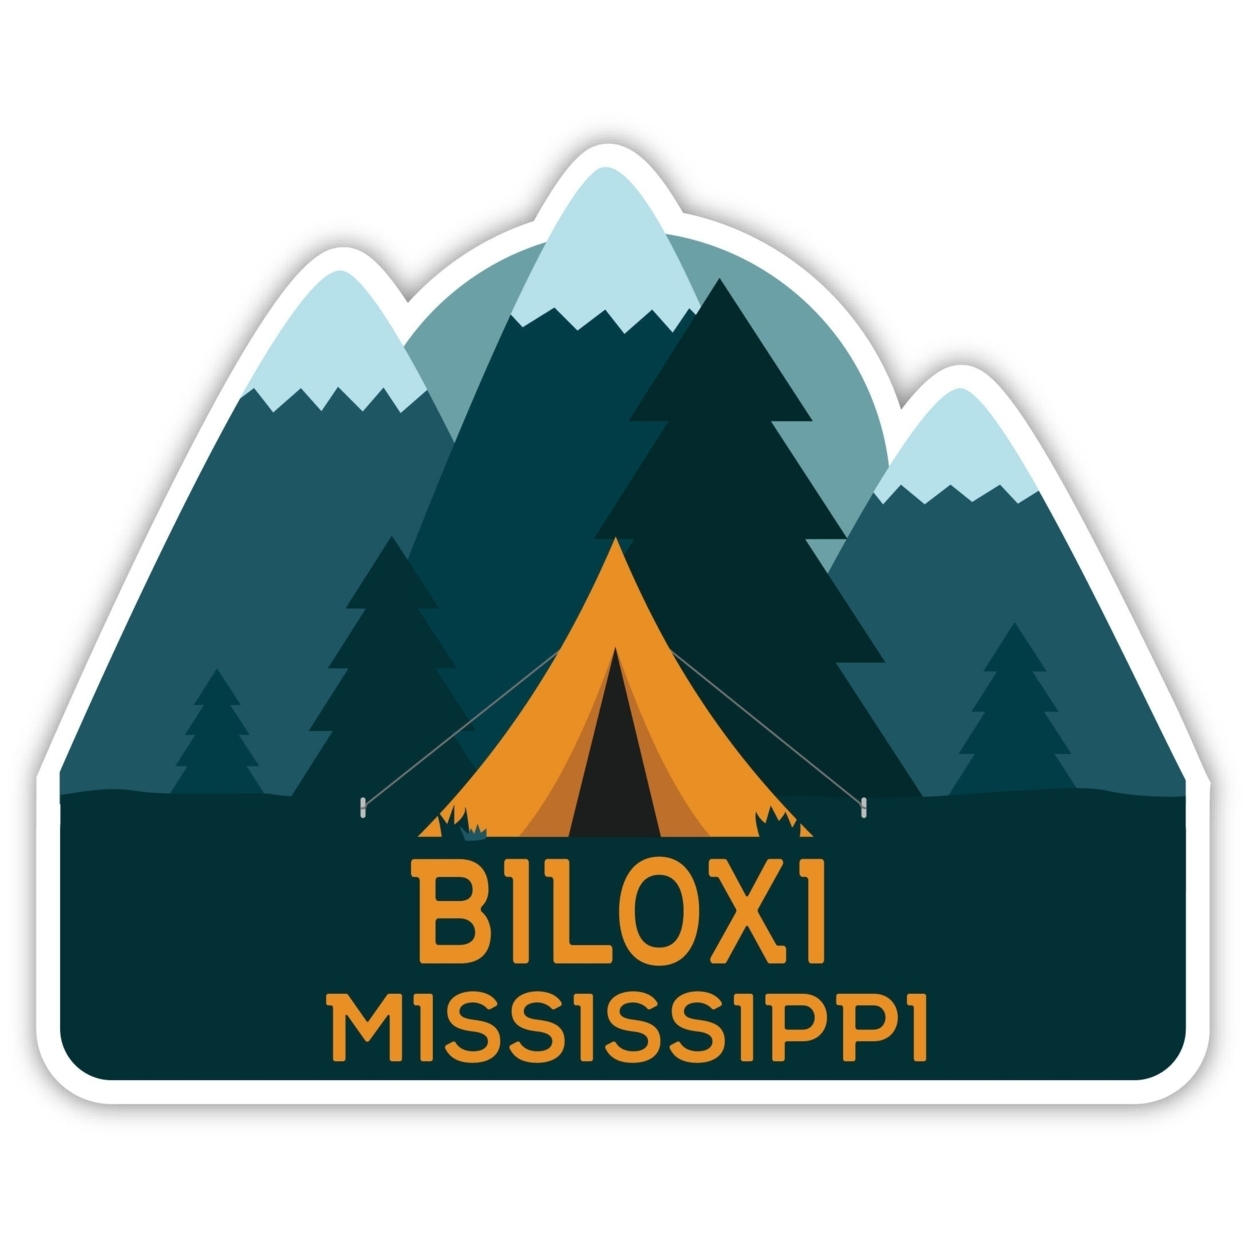 Biloxi Mississippi Souvenir Decorative Stickers (Choose Theme And Size) - 4-Pack, 10-Inch, Tent